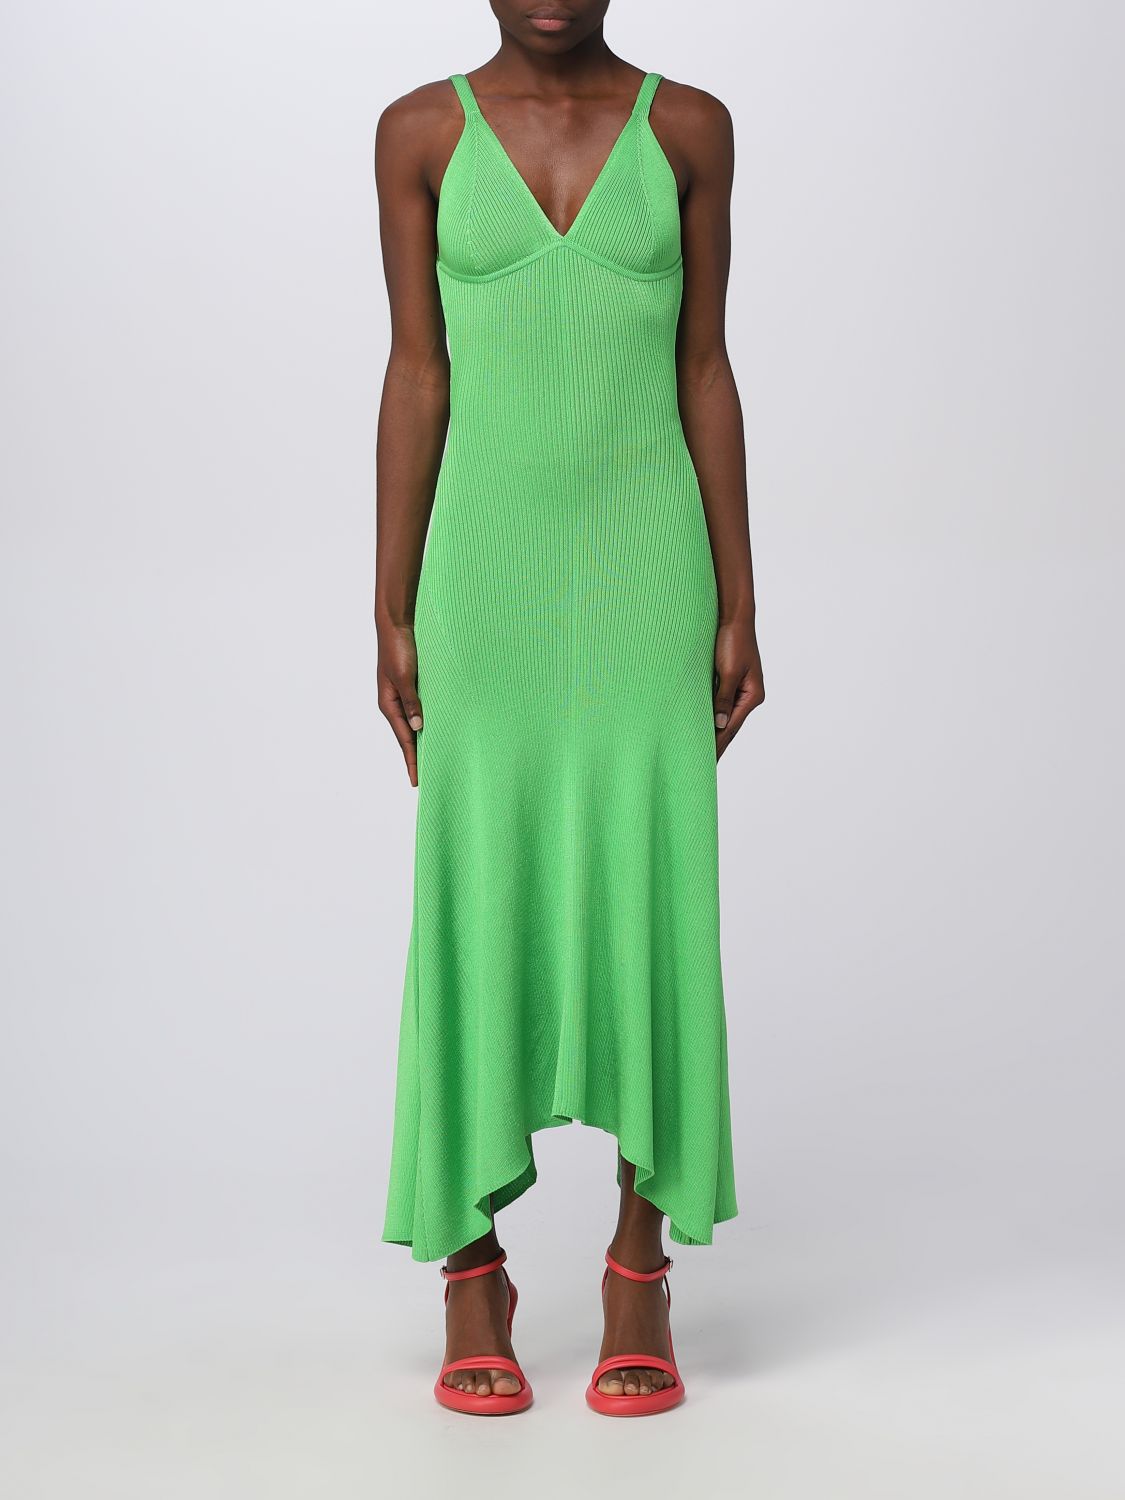 TOMMY HILFIGER COLLECTION: dress for woman - Green | Tommy Hilfiger ...